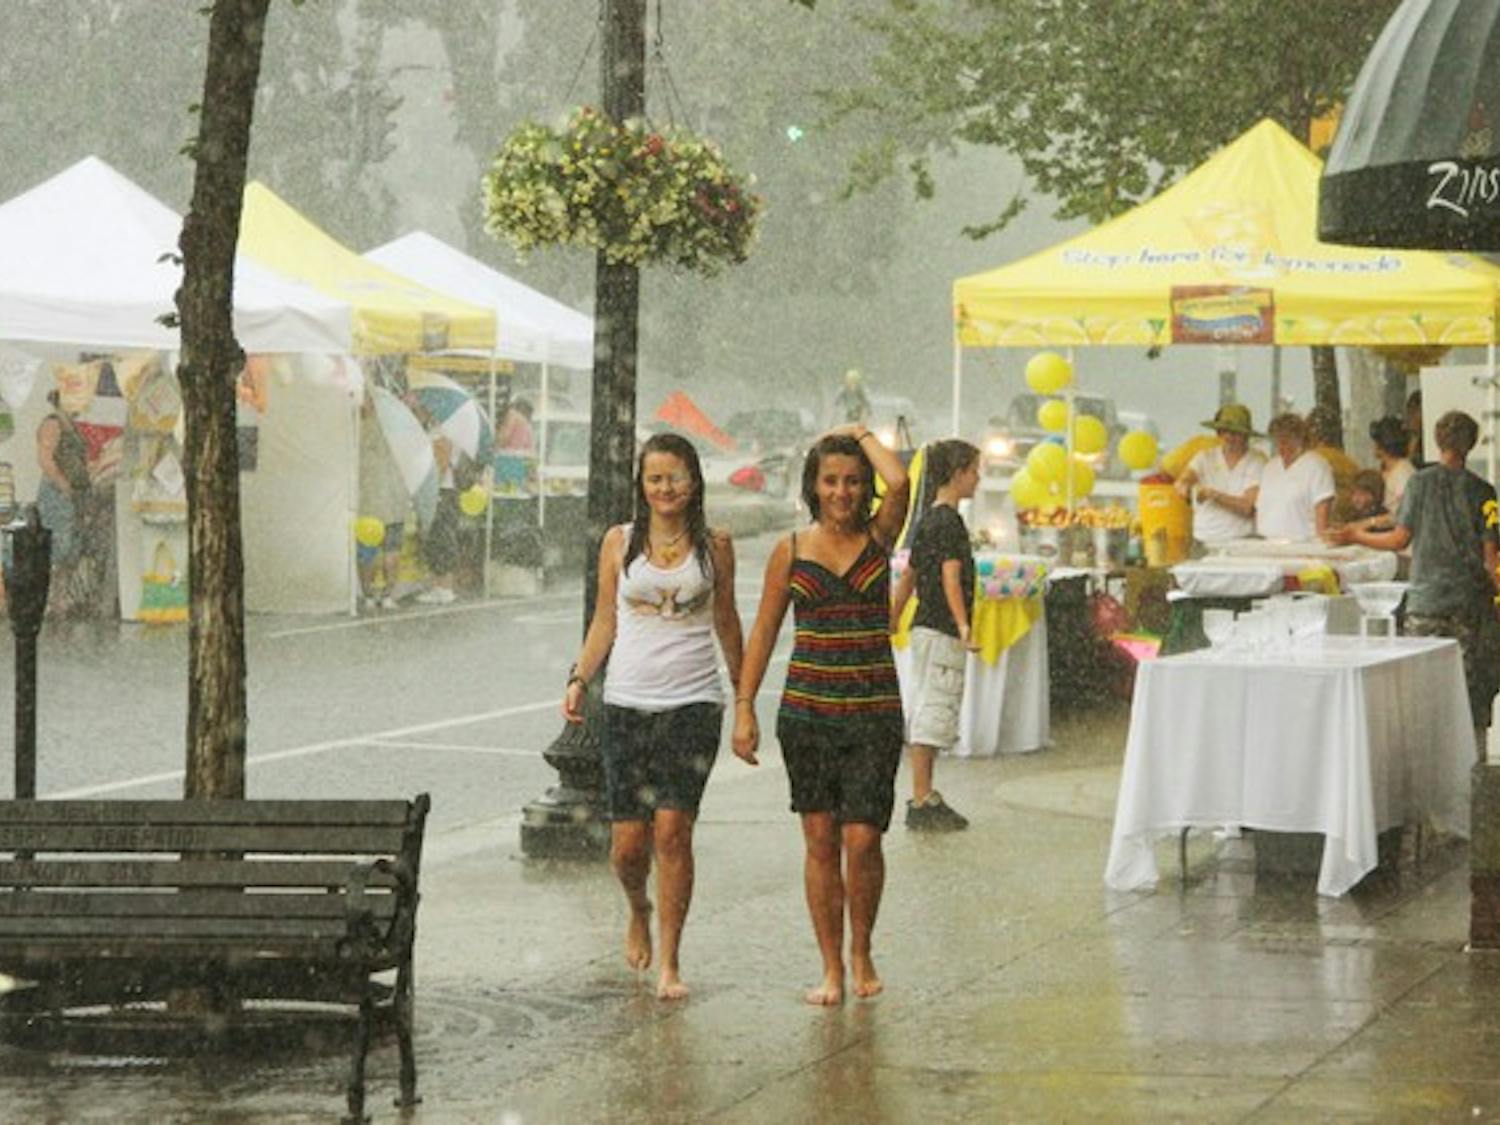 The 29th annual Hanover Streetfest welcomed community residents to enjoy goods from local vendors and restaurants, despite rainy weather.